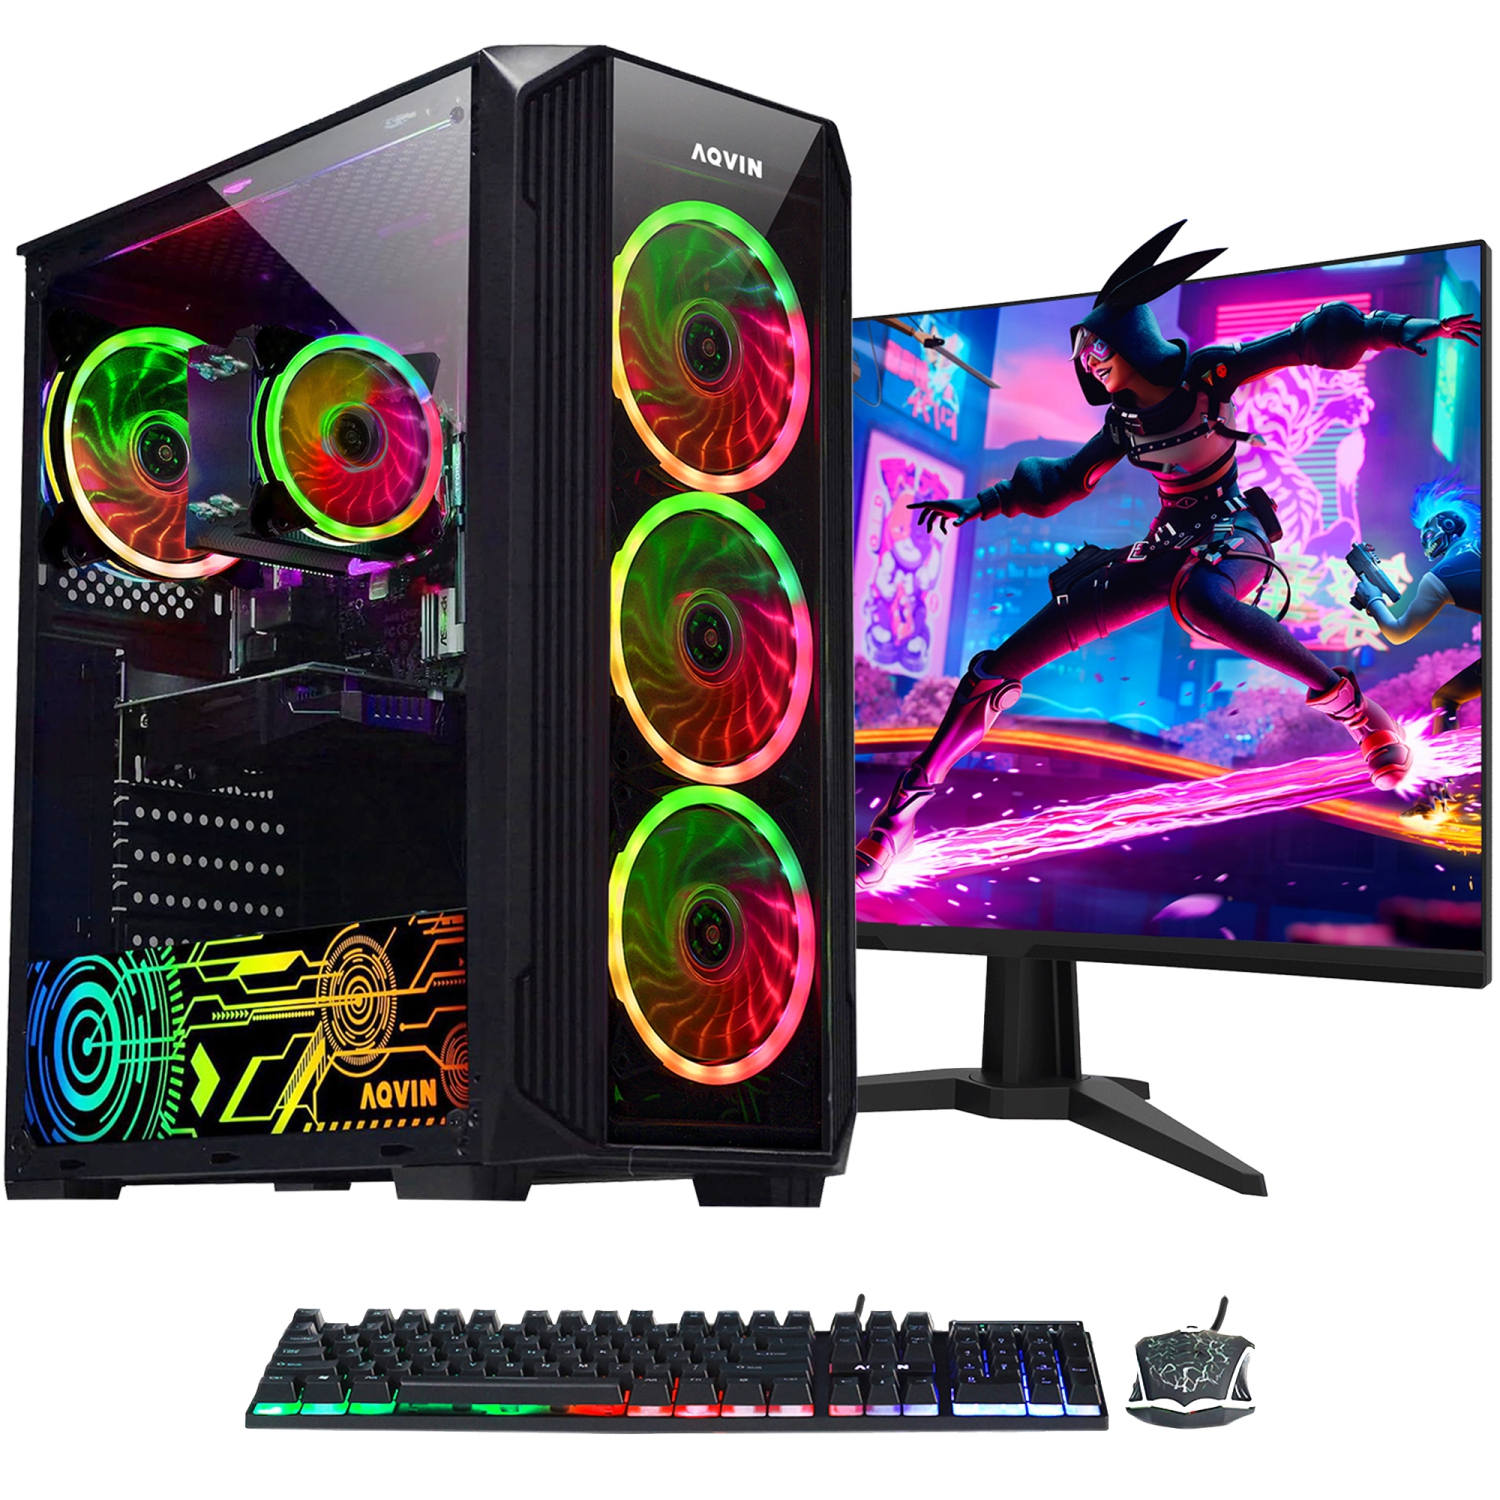 Refurbished (Excellent) - Gaming PC AQVIN ZForce Desktop Computer | New 27inch Gaming Monitor | GeForce RTX 3050 HDMI | Intel Core i7 CPU | 32GB DDR4 RAM | 2TB SSD | Windows 10 Pro